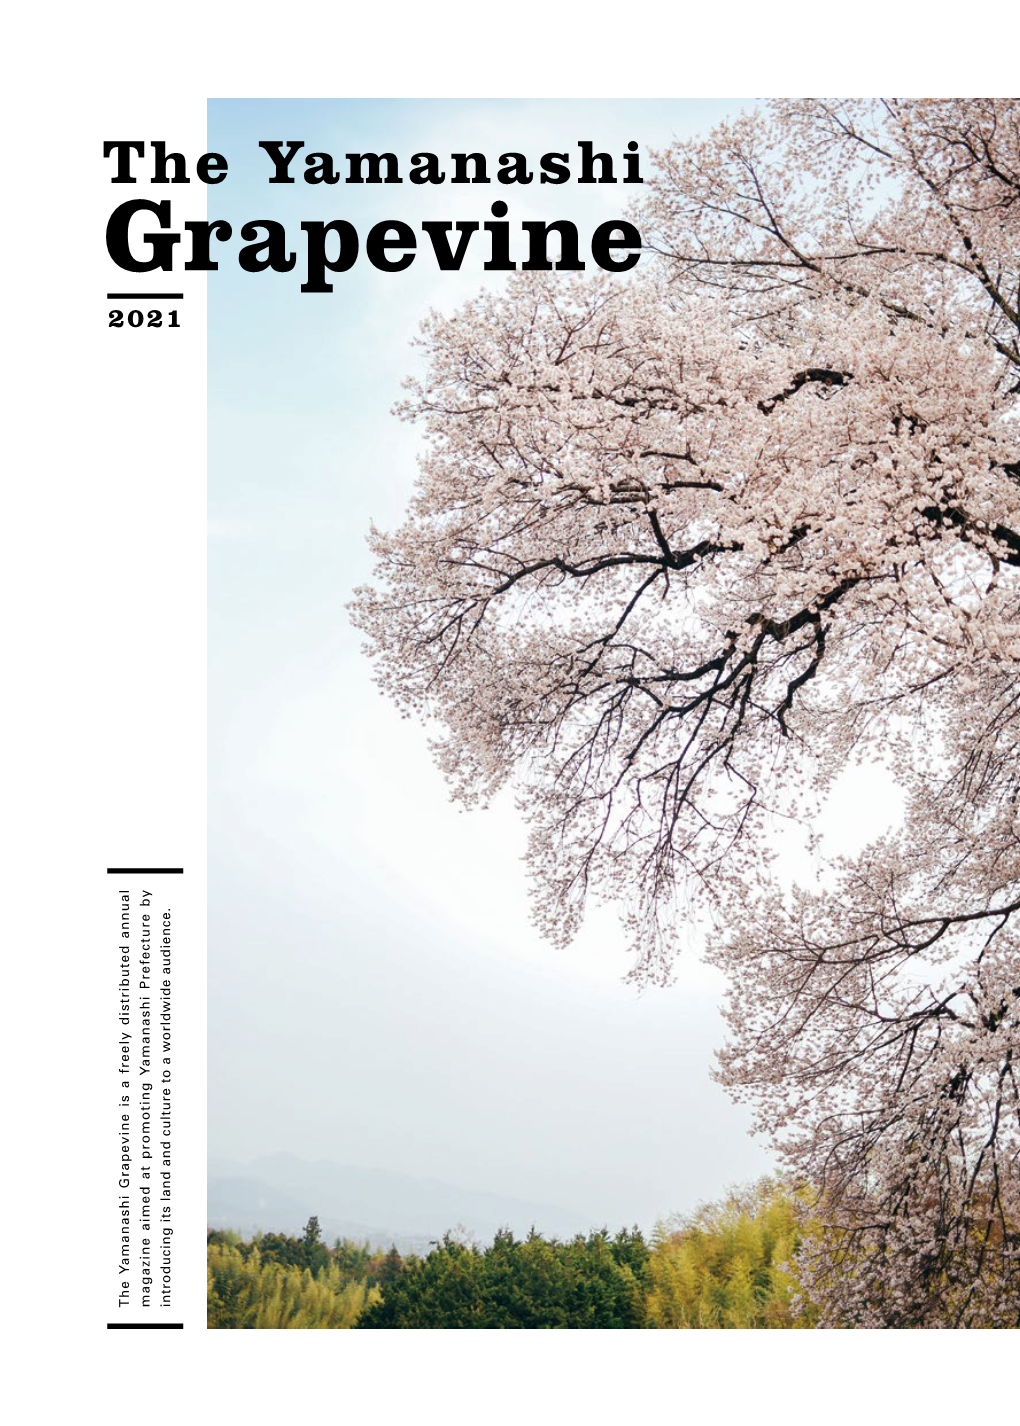 The Yamanashi Grapevine Is a Freely Distributed Annual Magazine Aimed at Promoting Yamanashi Prefecture by Introducing Its Land and Culture to a Worldwide Audience